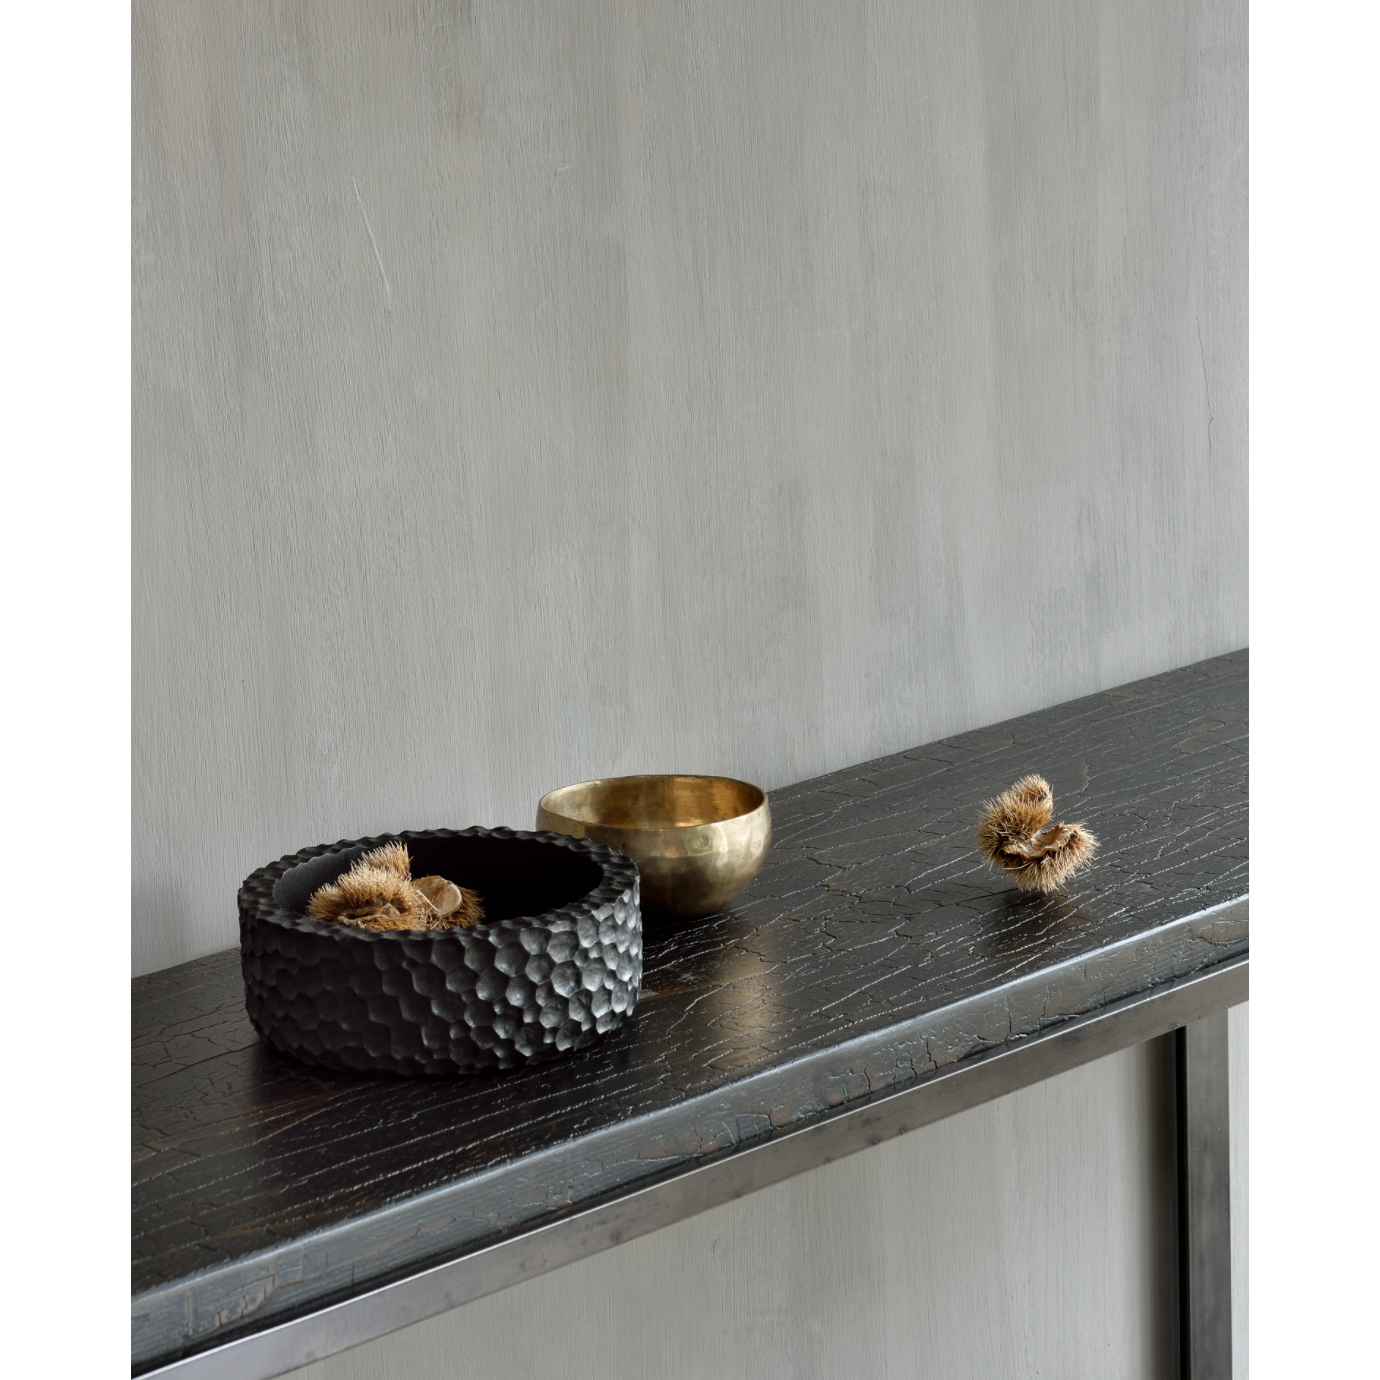 The deep surface of the Stability console is shaped by hand by skilled artisans. Natural mineral powders and color pigments blend to form the console's unique finish. We love how this piece's simple lines showcase the clean beauty of well-crafted metal work. We imagine this unique piece in your entry hall or behind your sofa.  Dimensions: 67"w x 16"d x 30"h  Weight: 30 lbs  Material: Minerals Finish: Metallic 